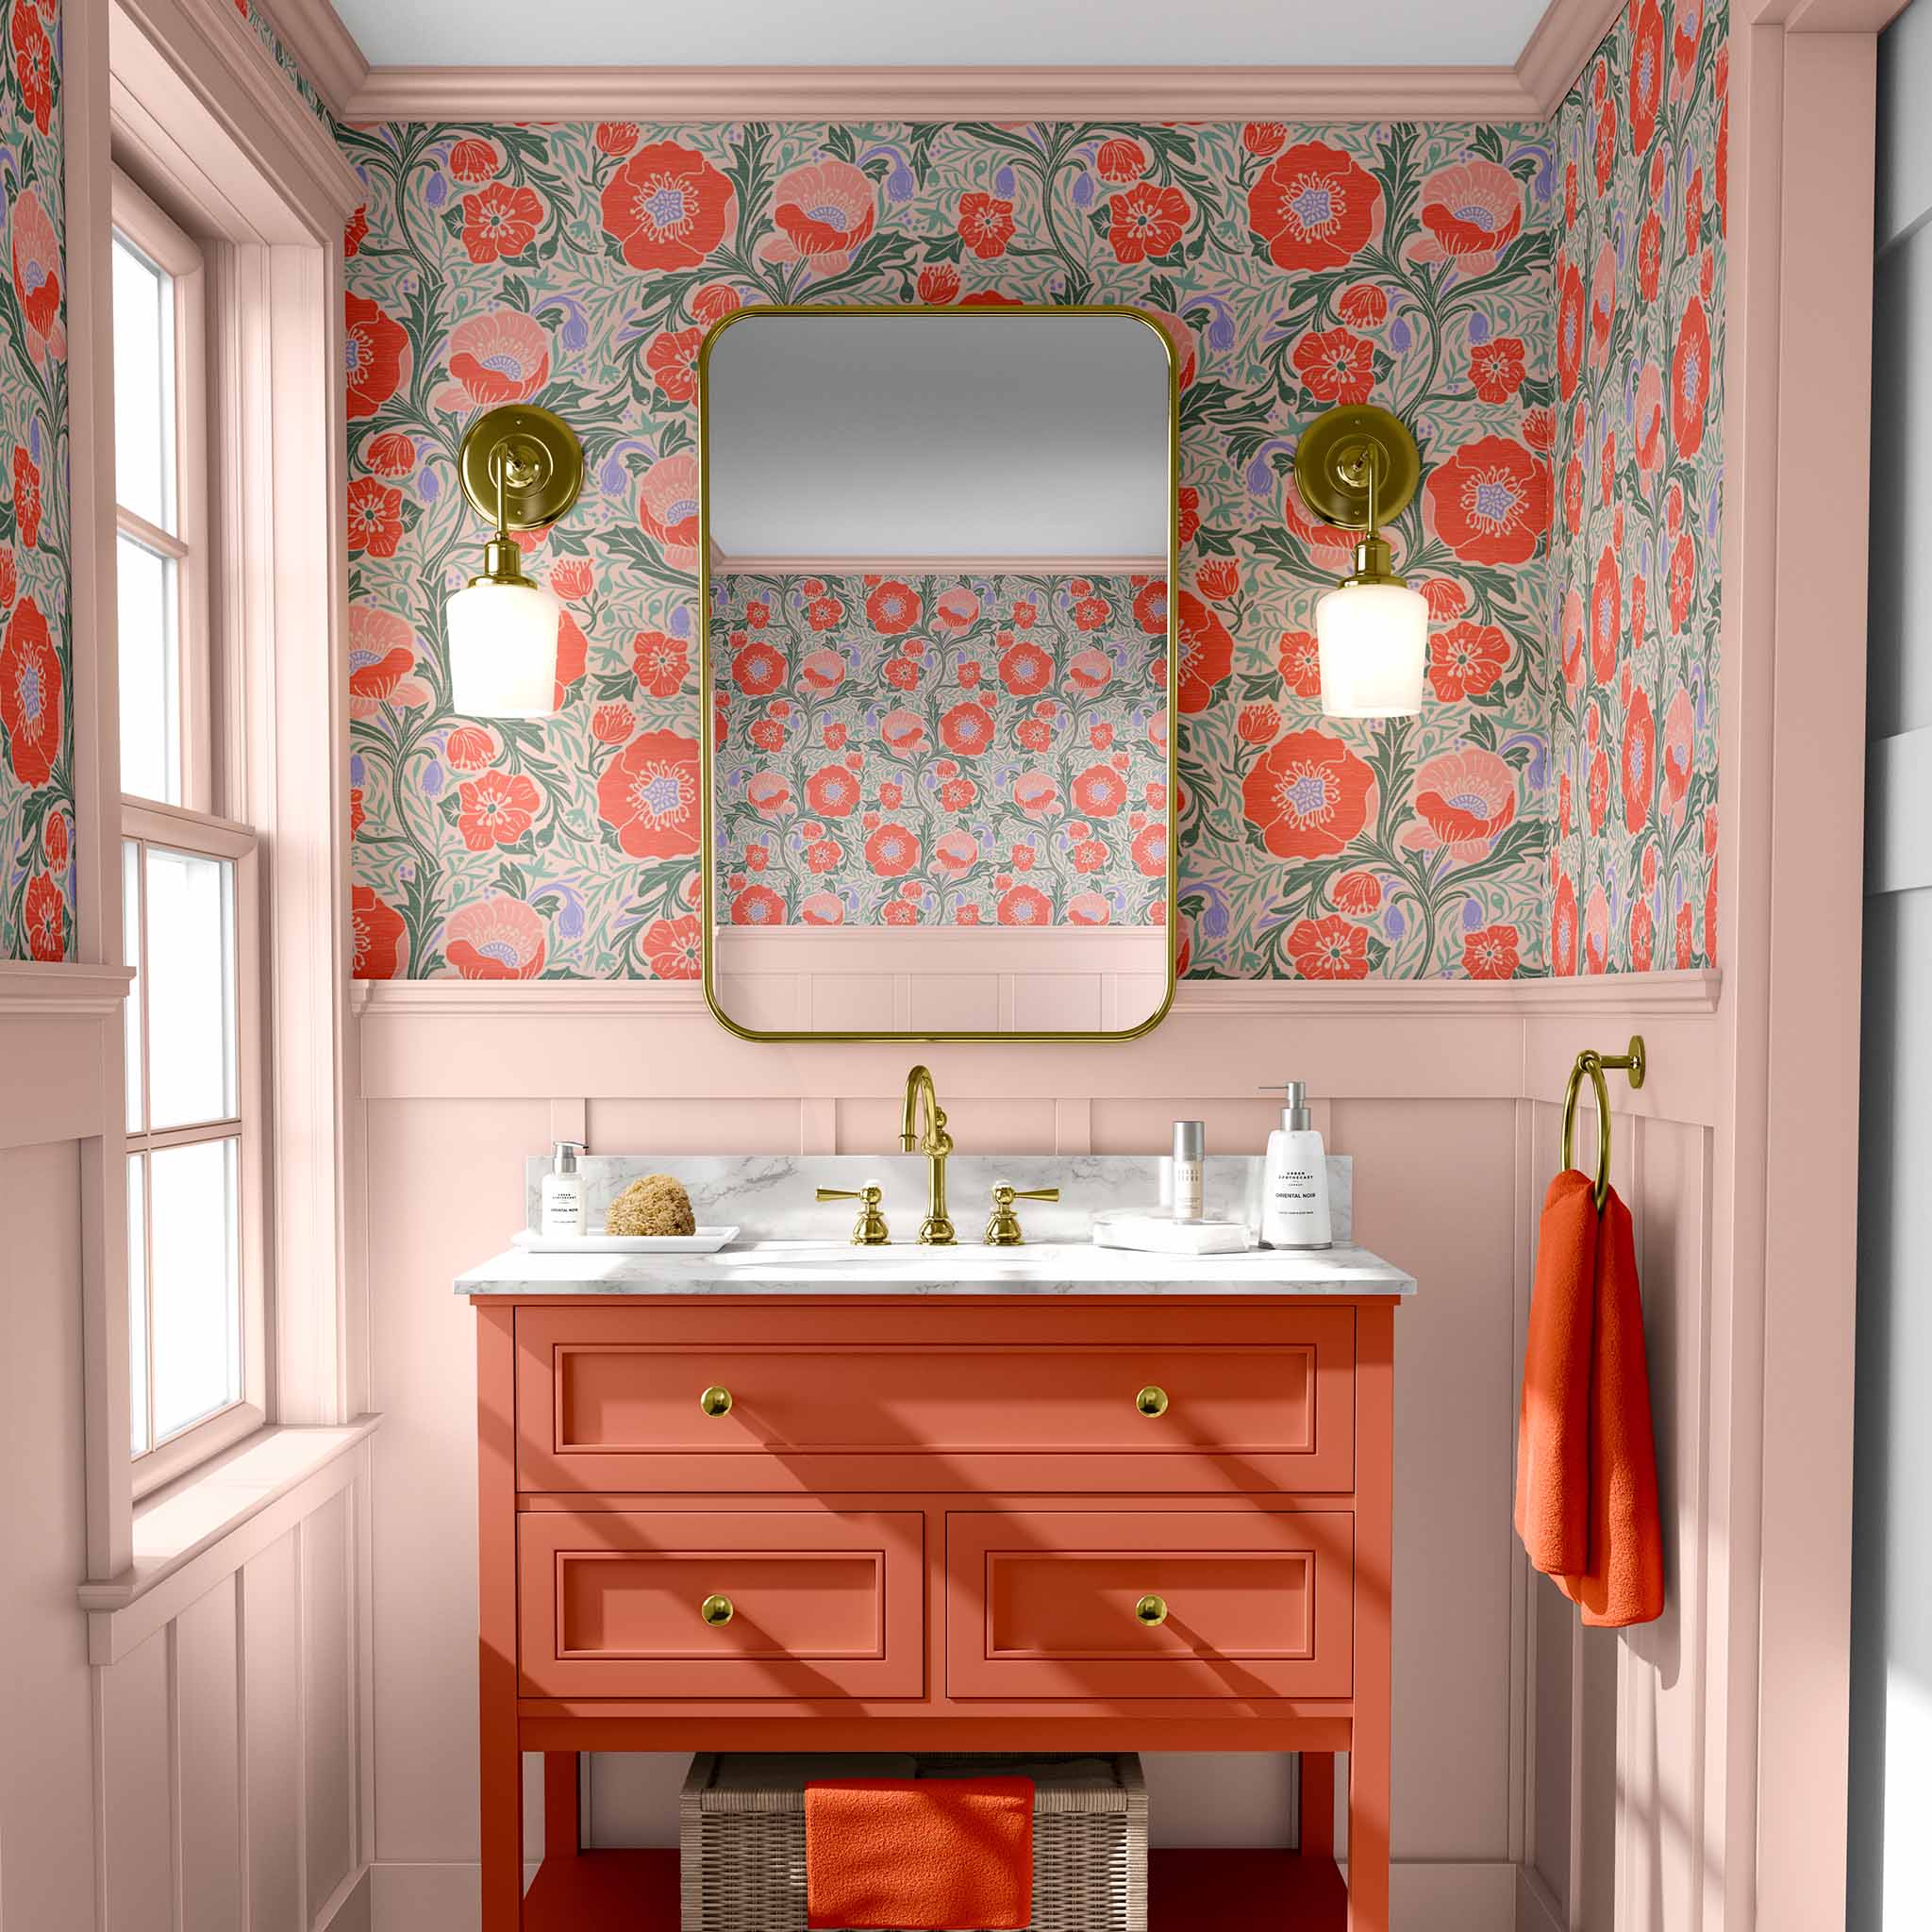 Red Poppy Pattern Pre-Pasted Removable Wallpaper. A better choice for a bathroom